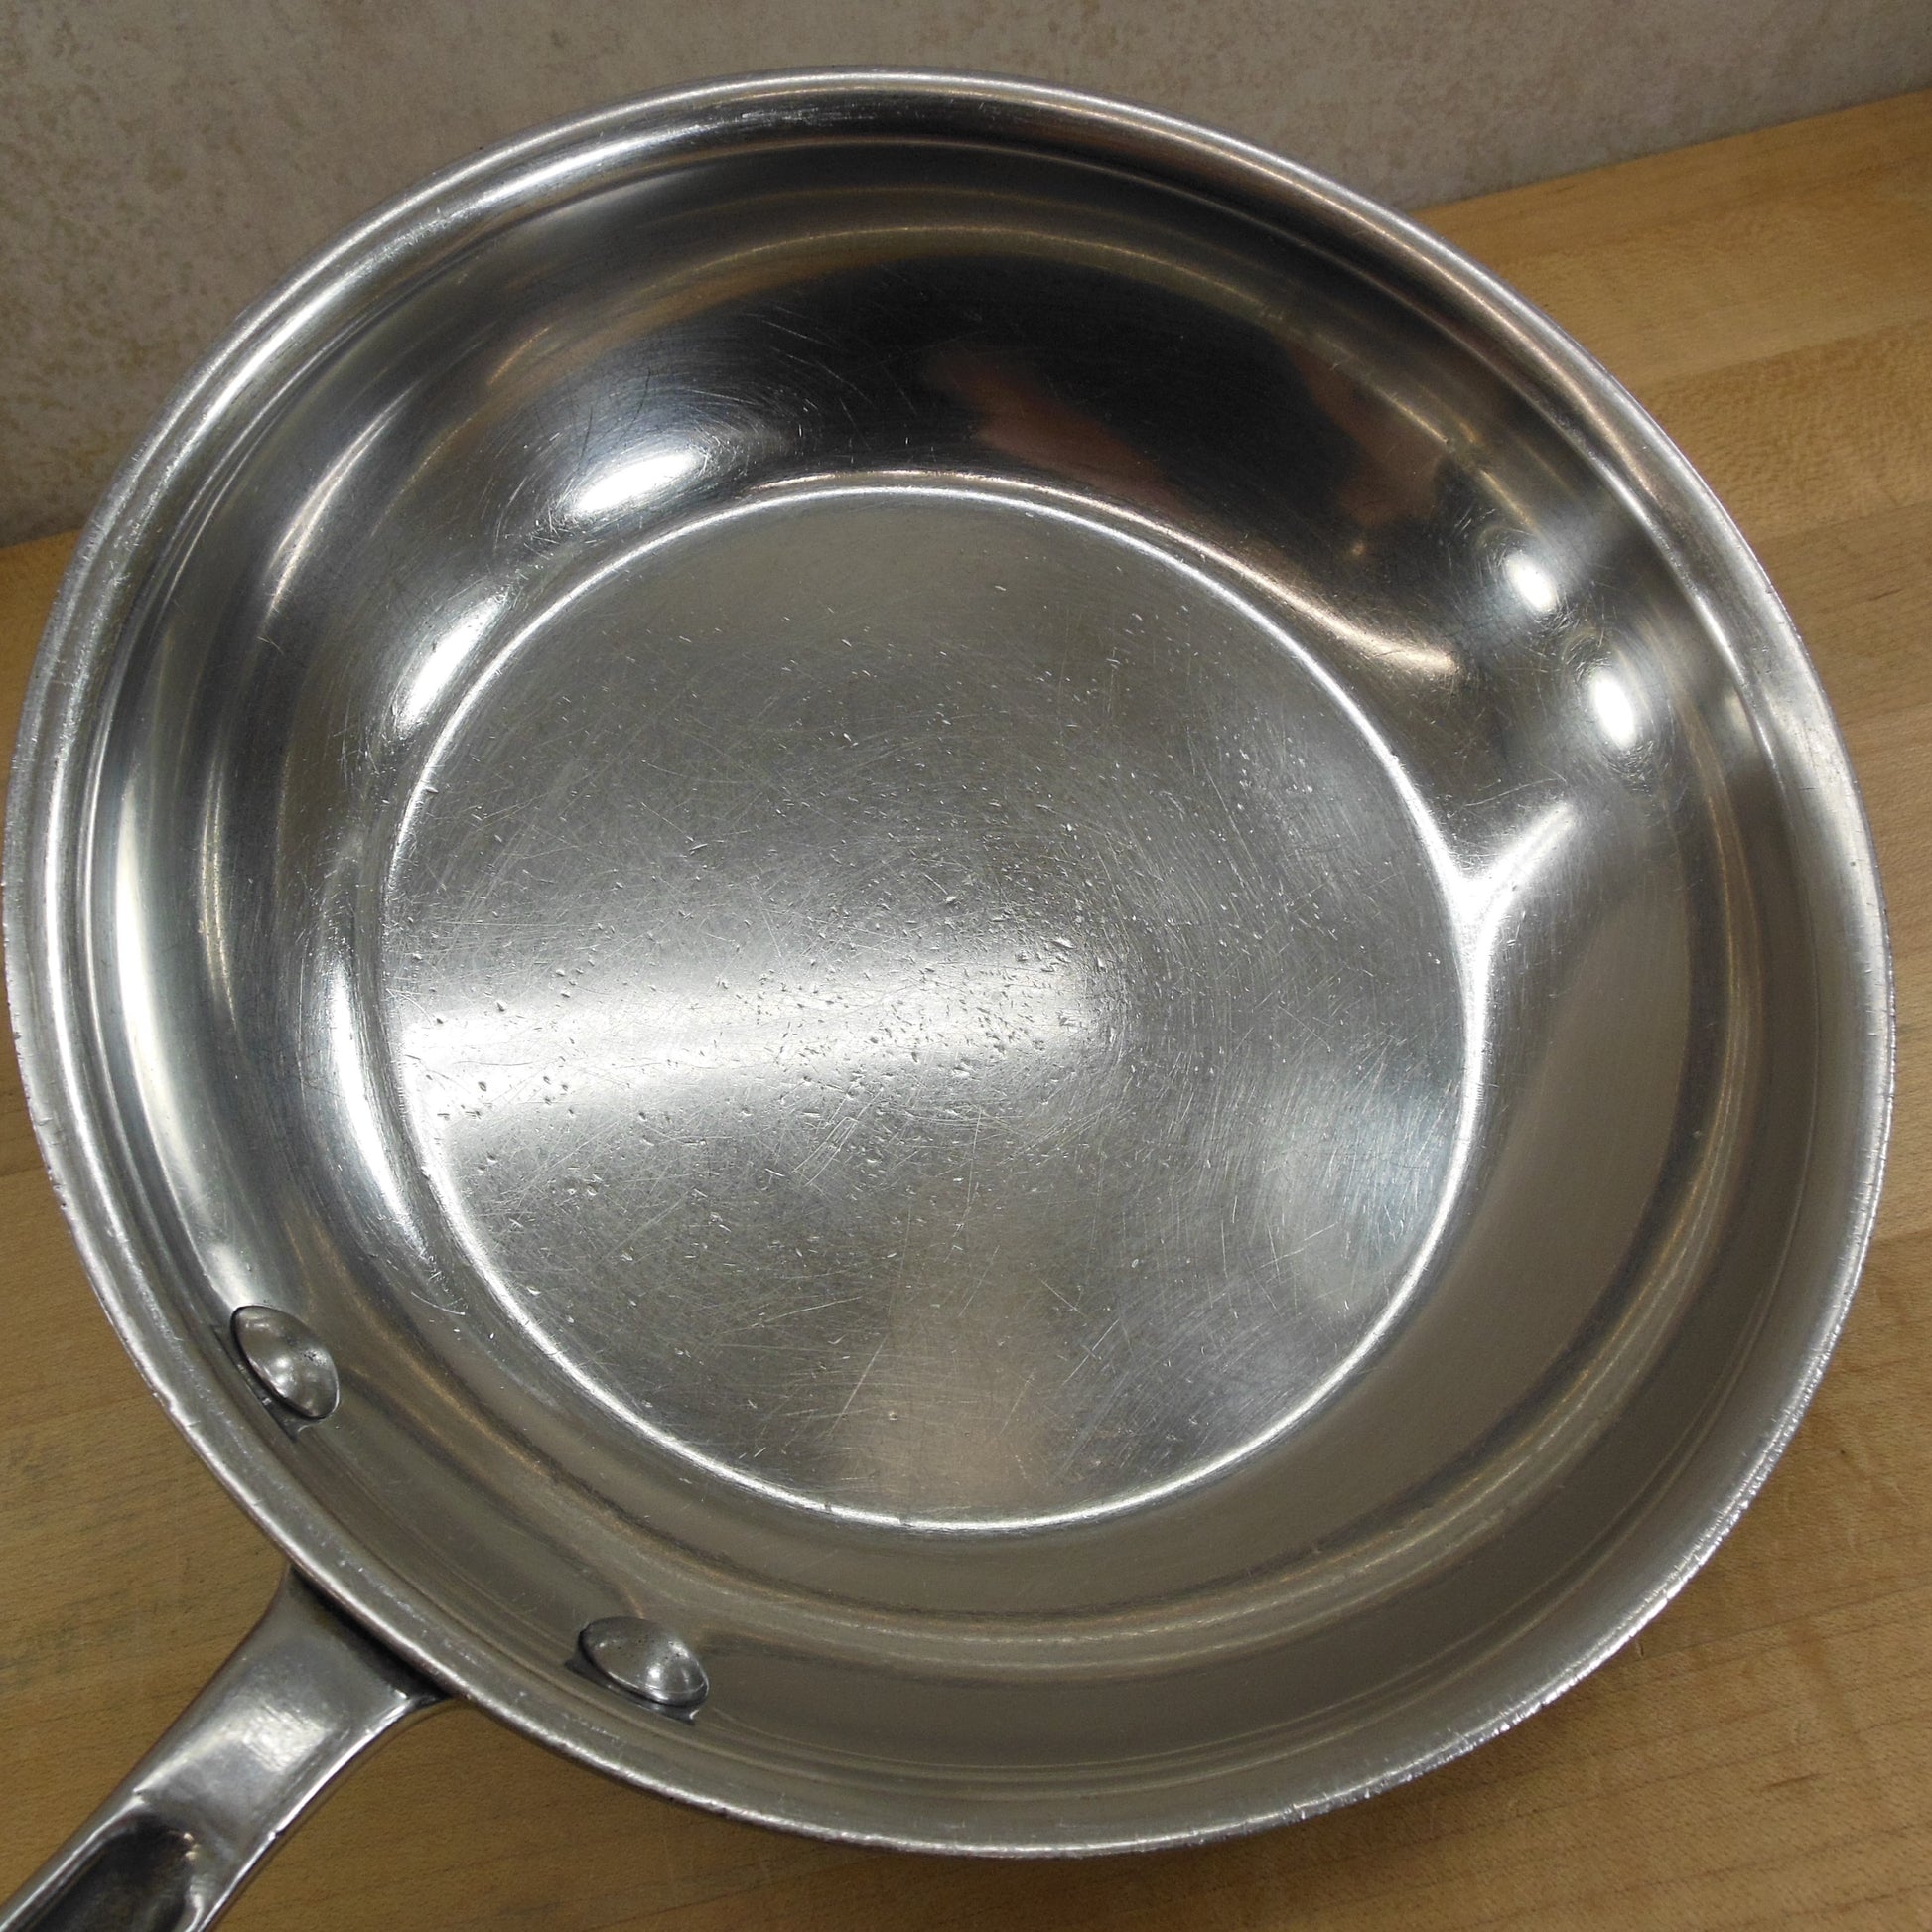 All-Clad, Kitchen, Vintage All Clad Stainless Steel Wok